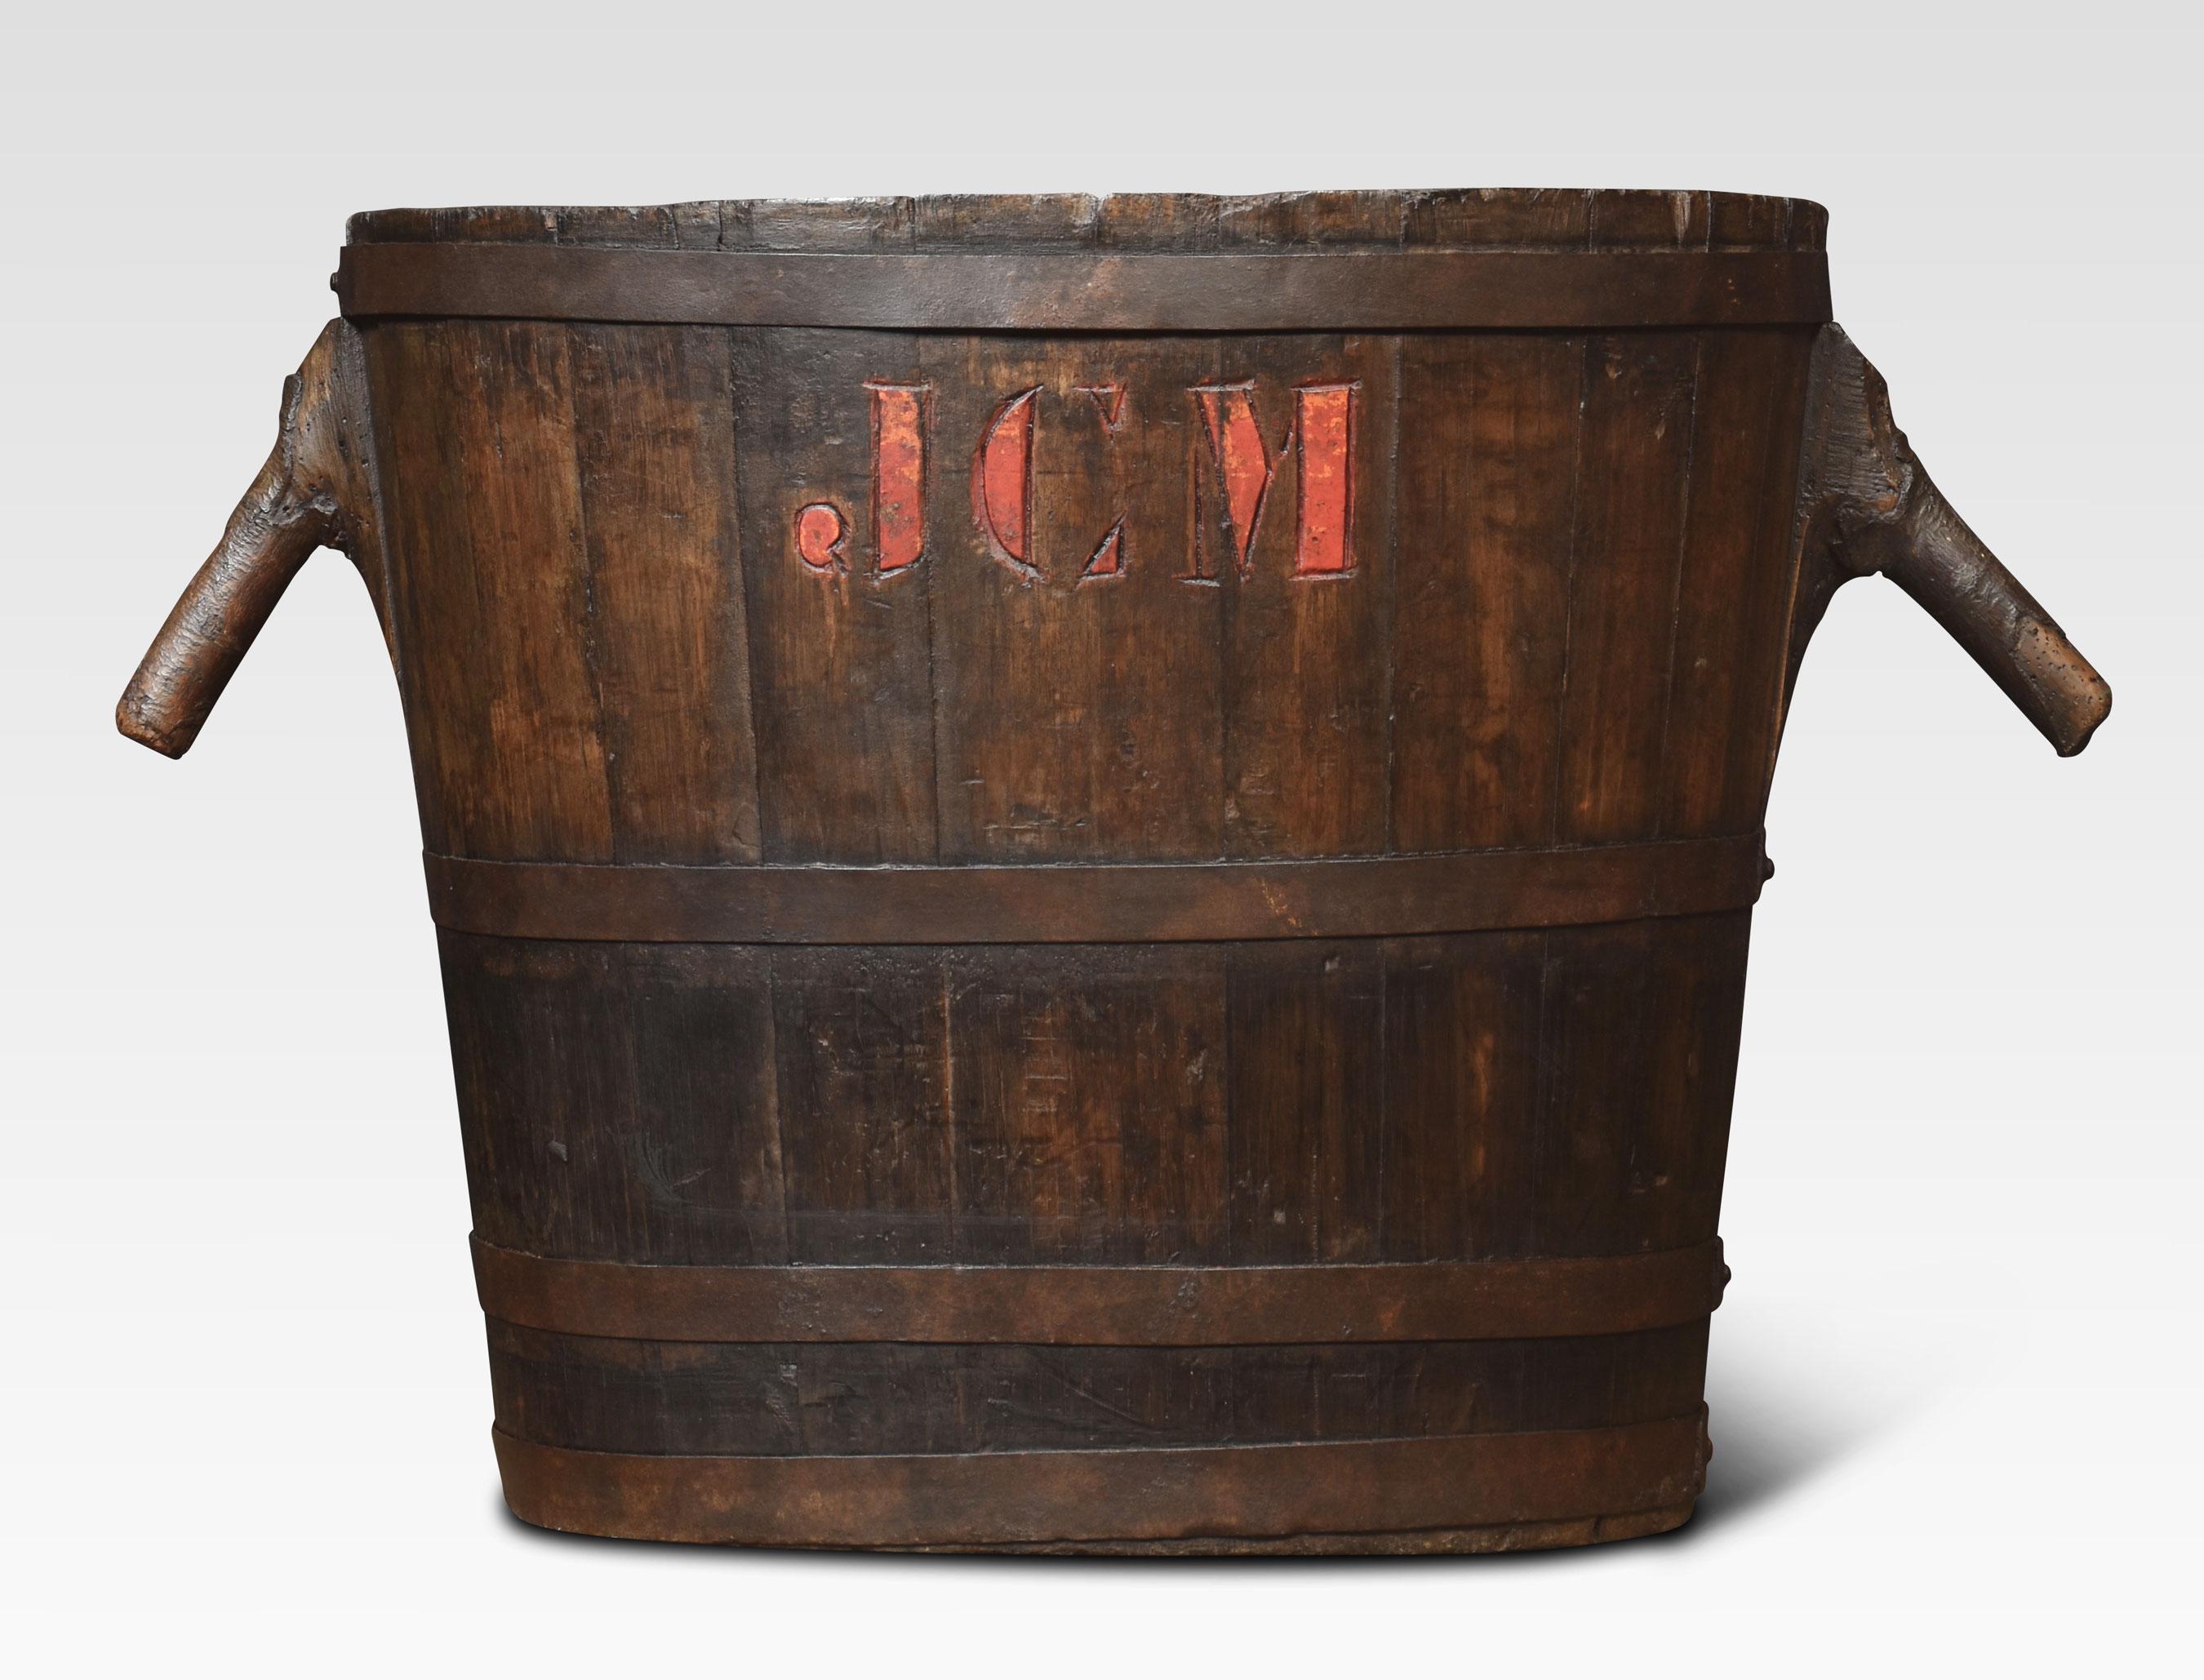 oval-shaped log bin the oak frame encased in iron bands having stylised handles.
Dimensions
Height 22 Inches
Width 35 Inches
Depth 18 Inches